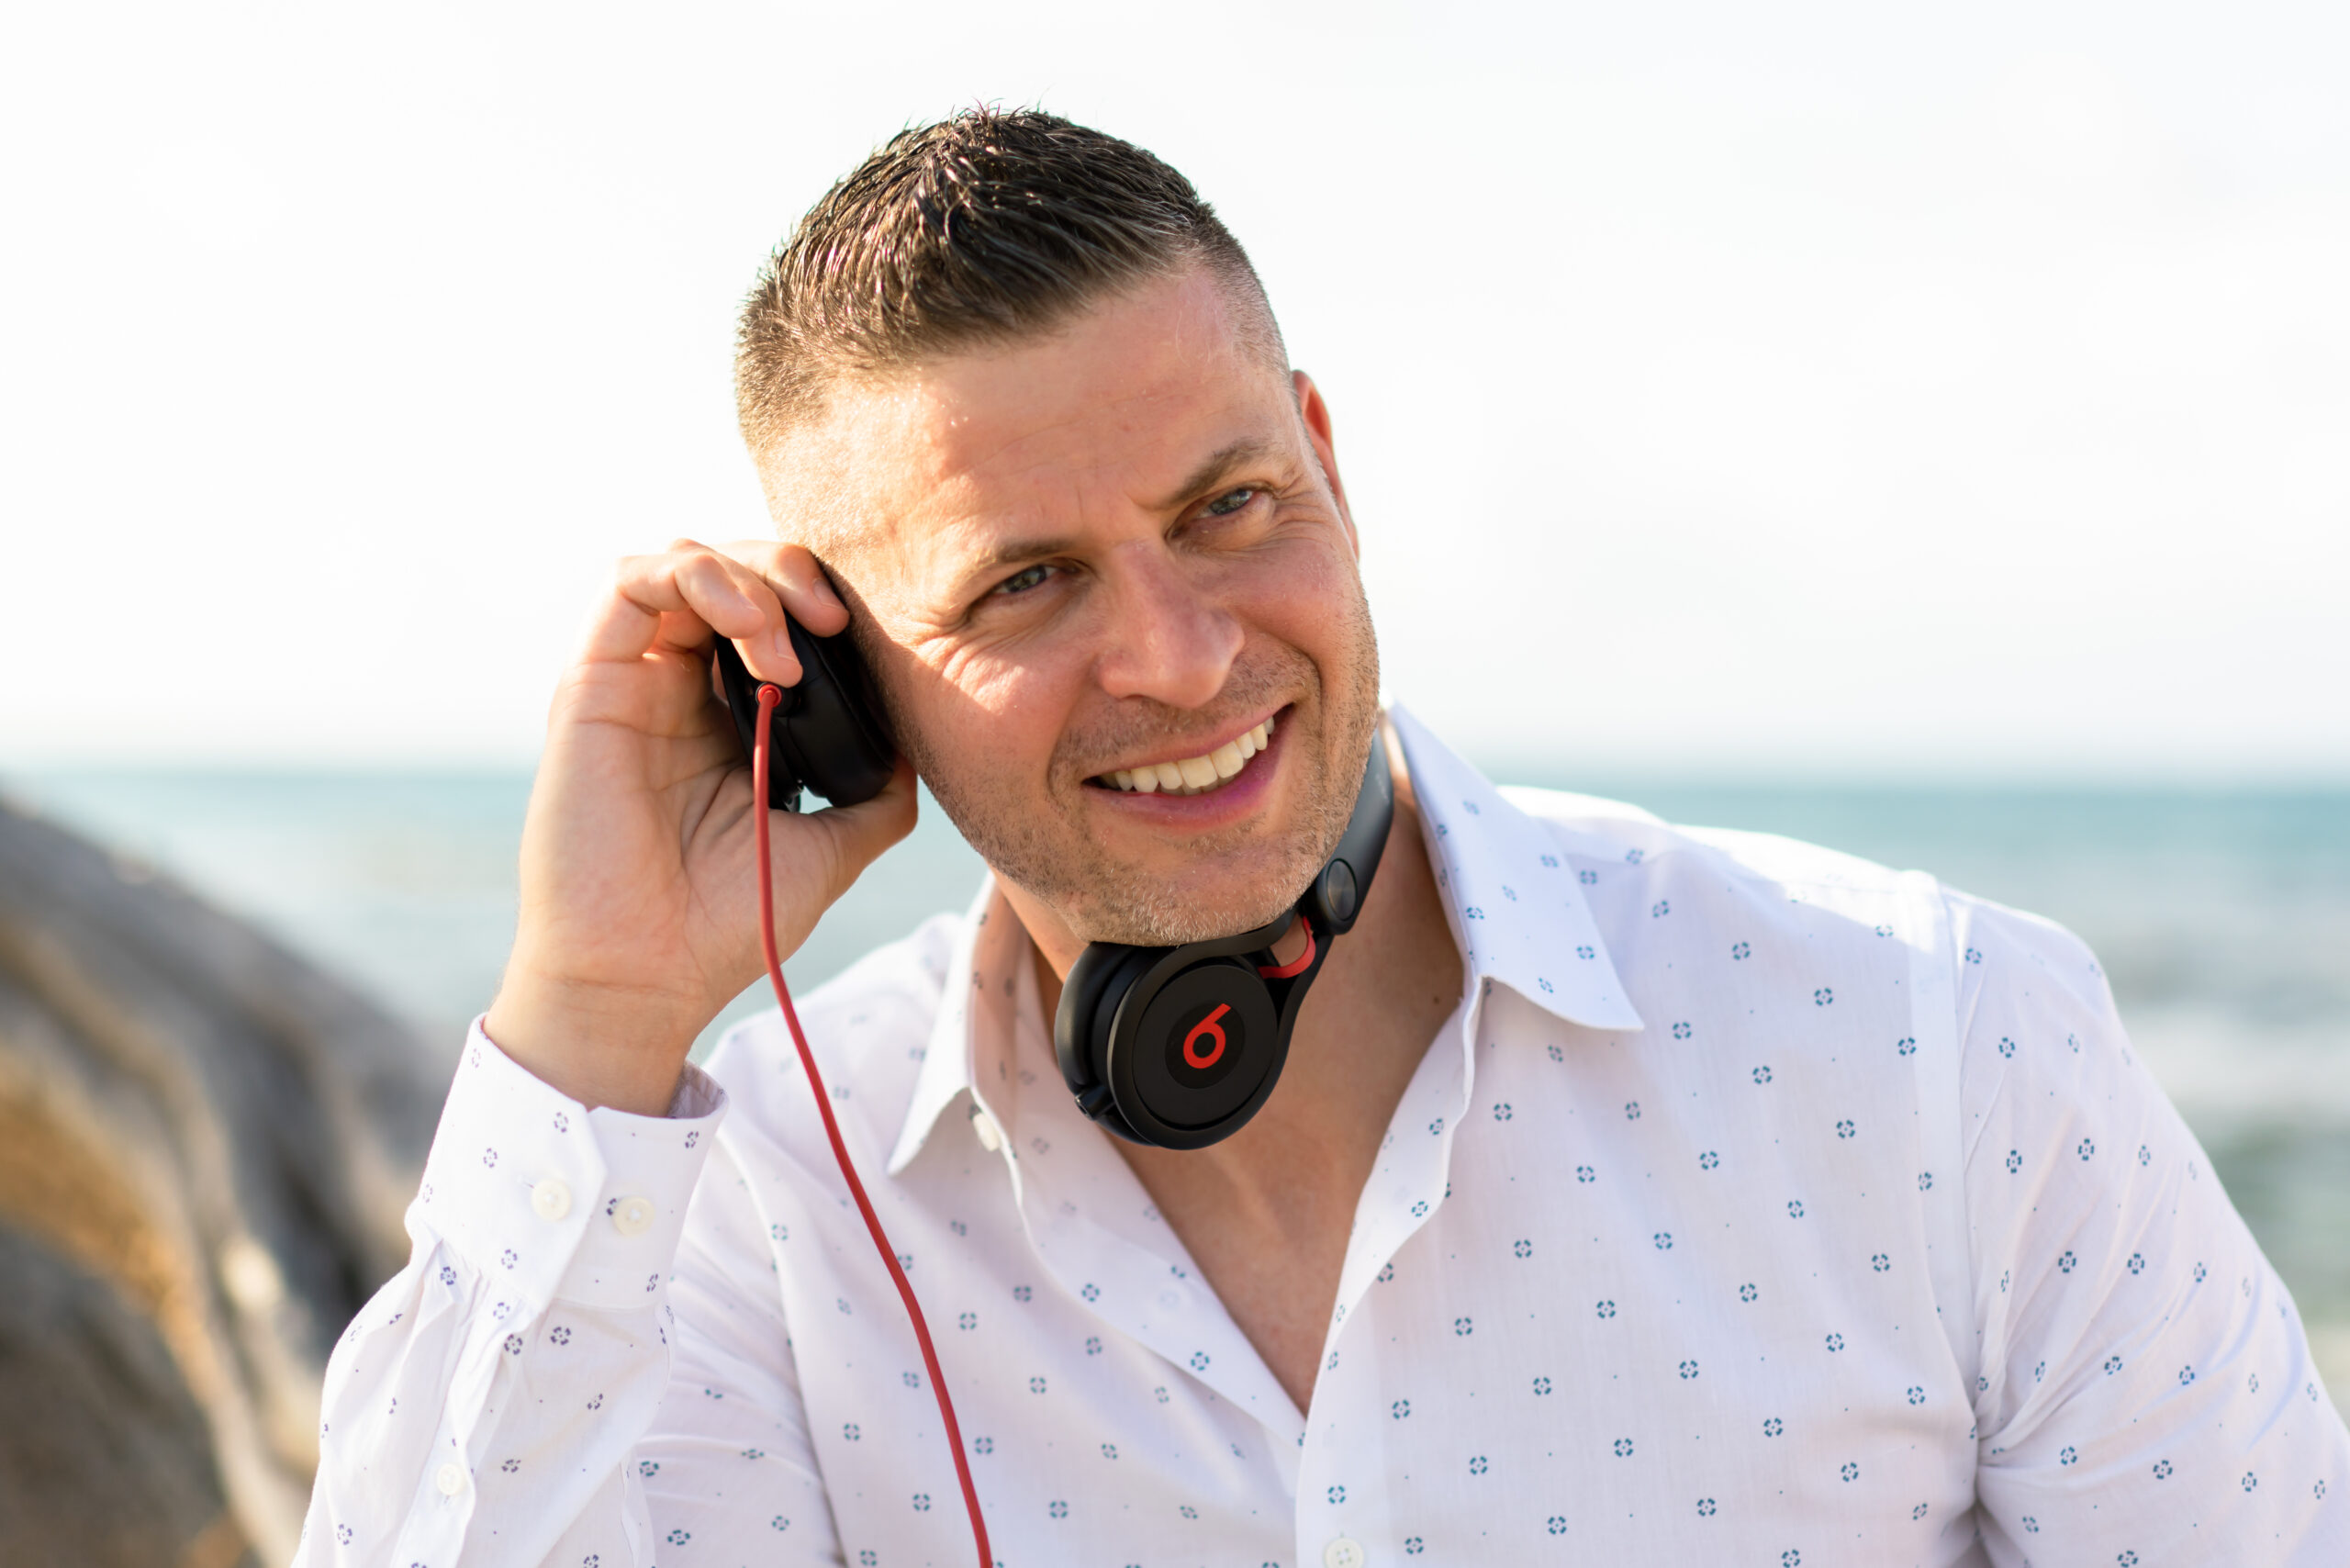 A man with headphones on smiling for the camera.